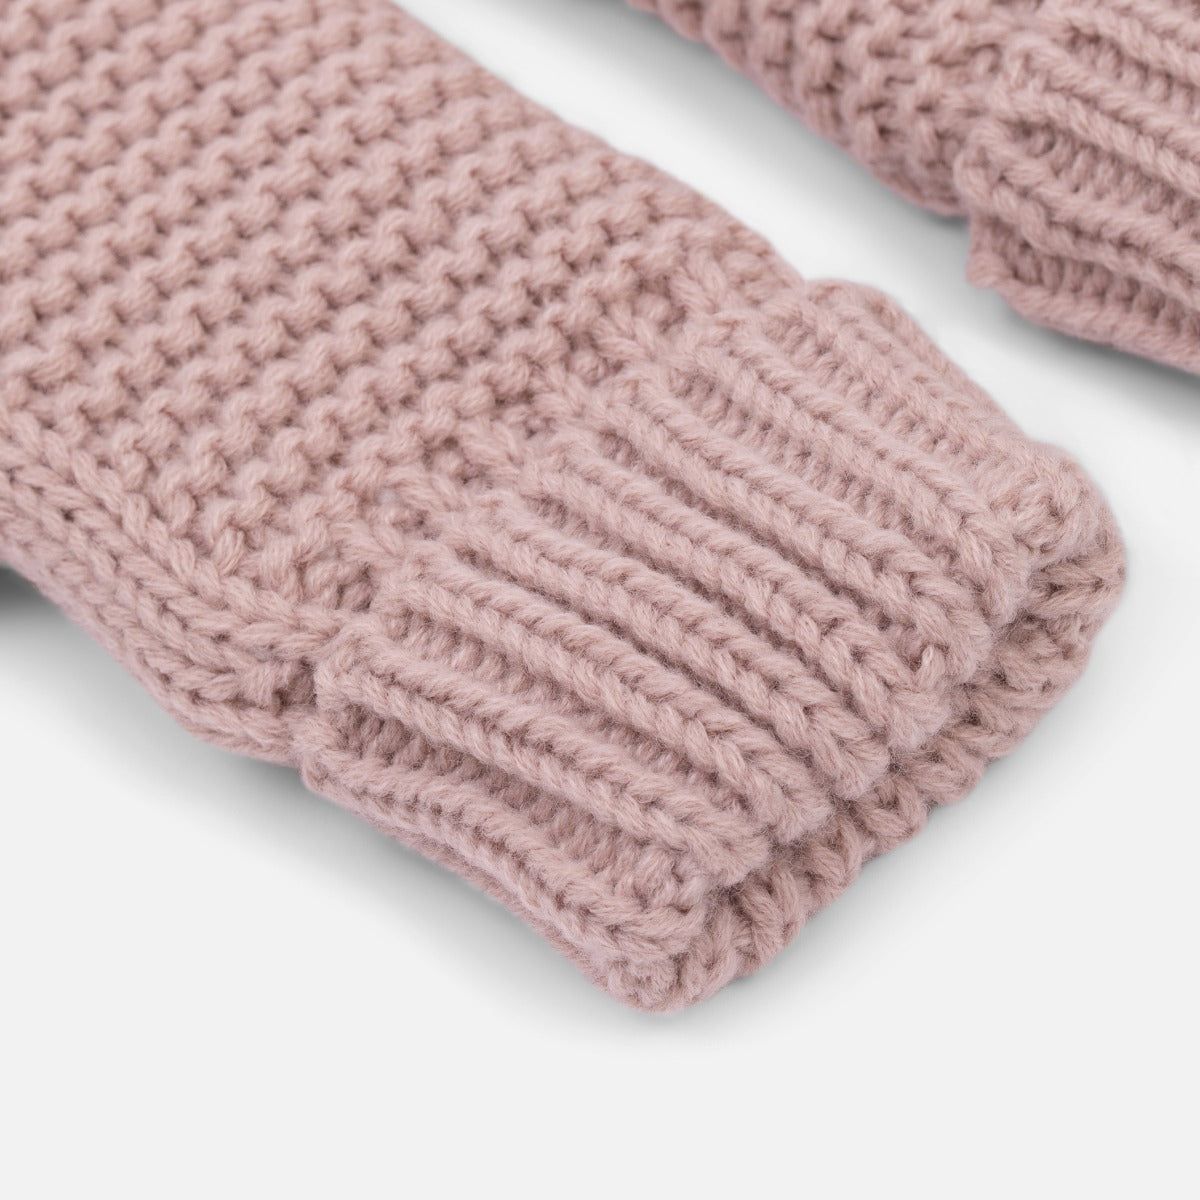 Old pink knit mittens